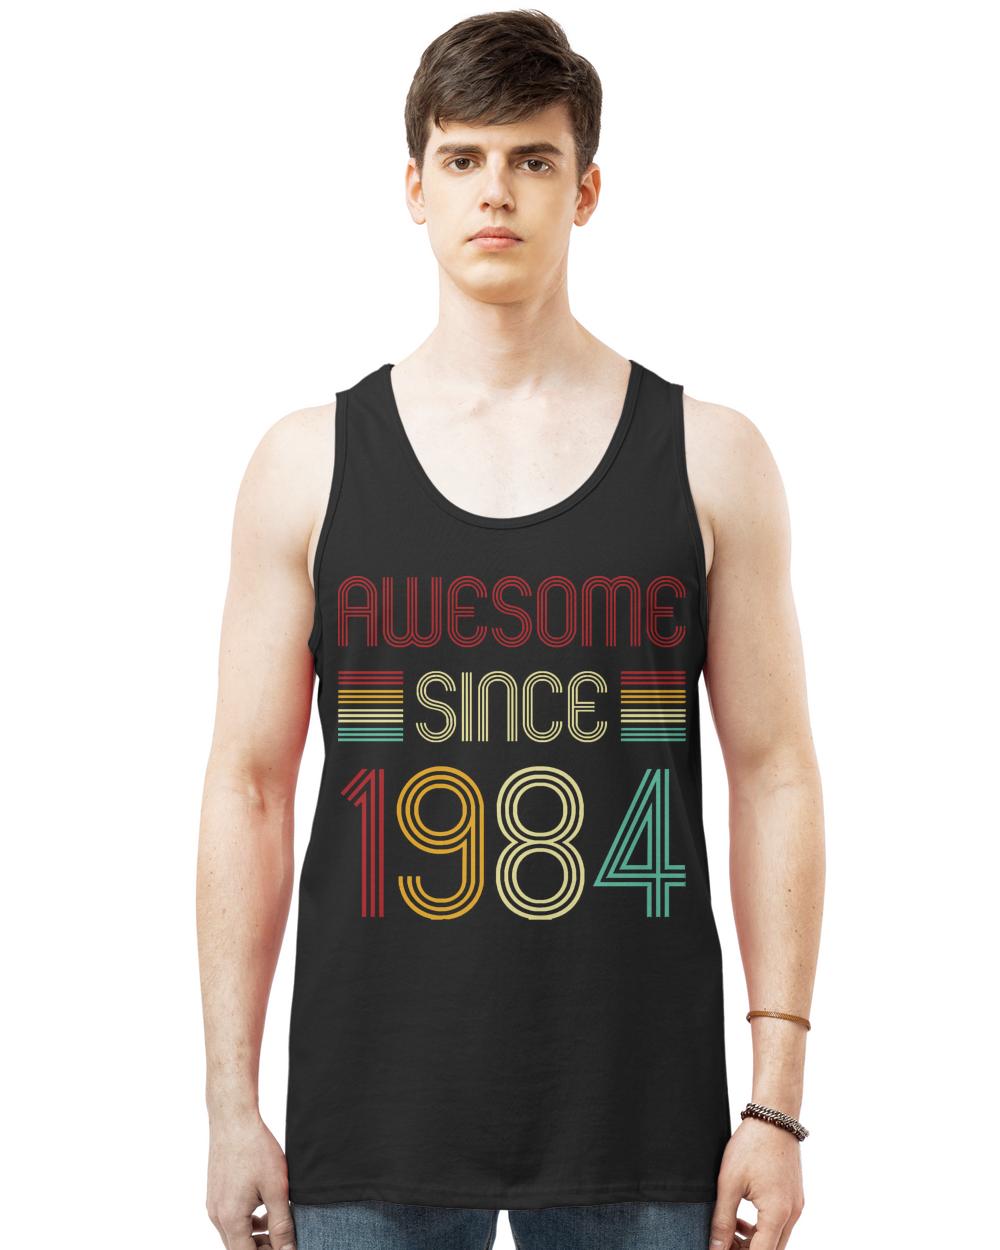 Vintage Awesome Since 1984 T-ShirtVintage Awesome Since 1984 T-Shirt